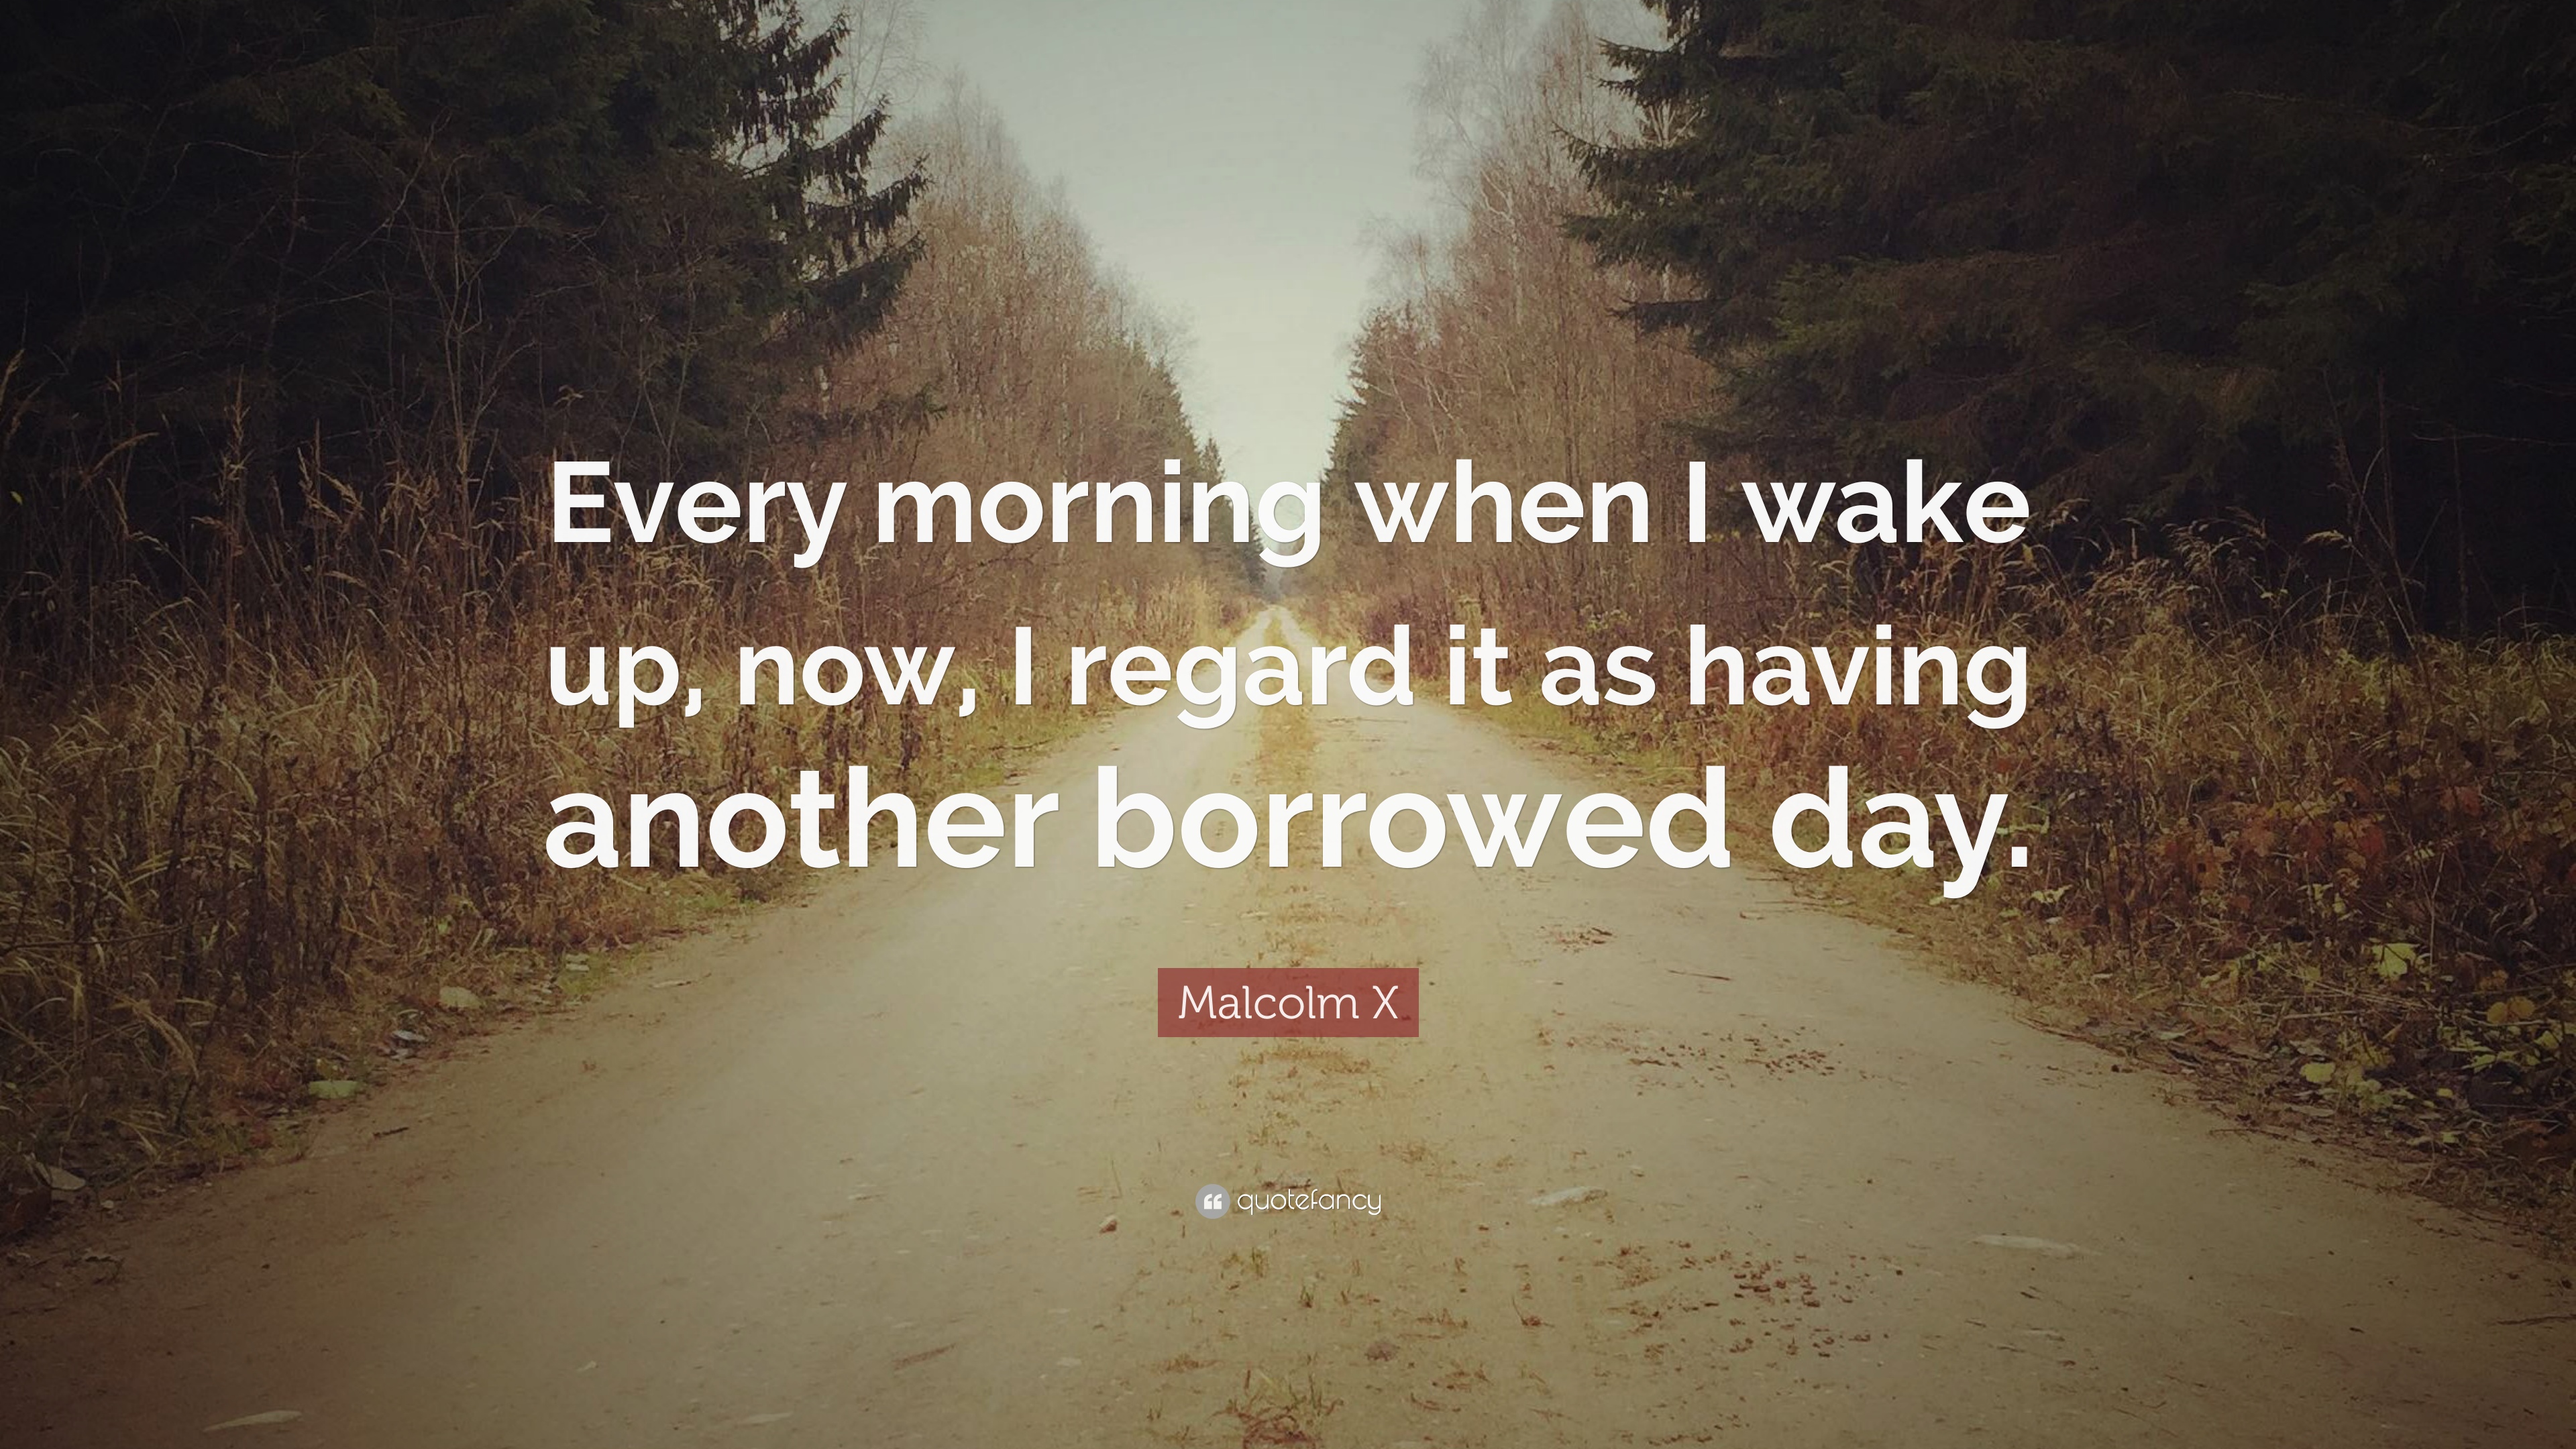 Malcolm X Quote: “Every morning when I wake up, now, I regard it as